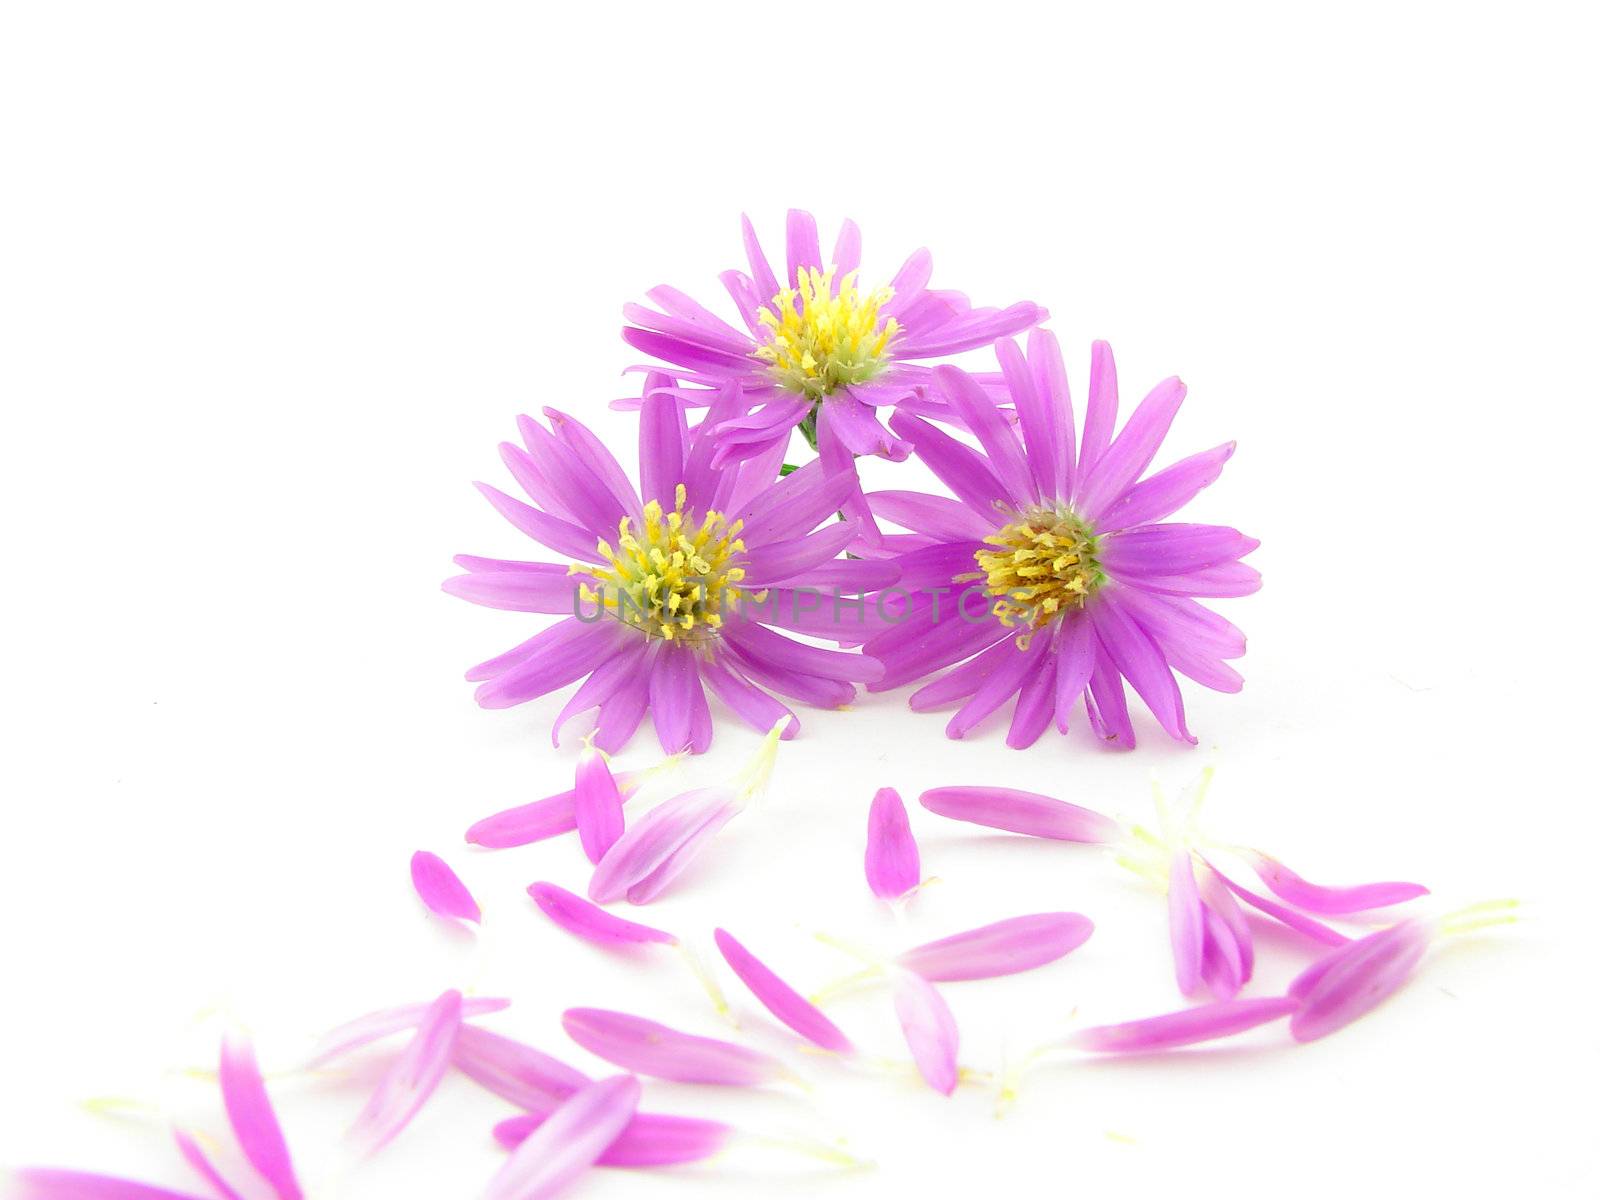 Pink flowers and petals isolated over white background.